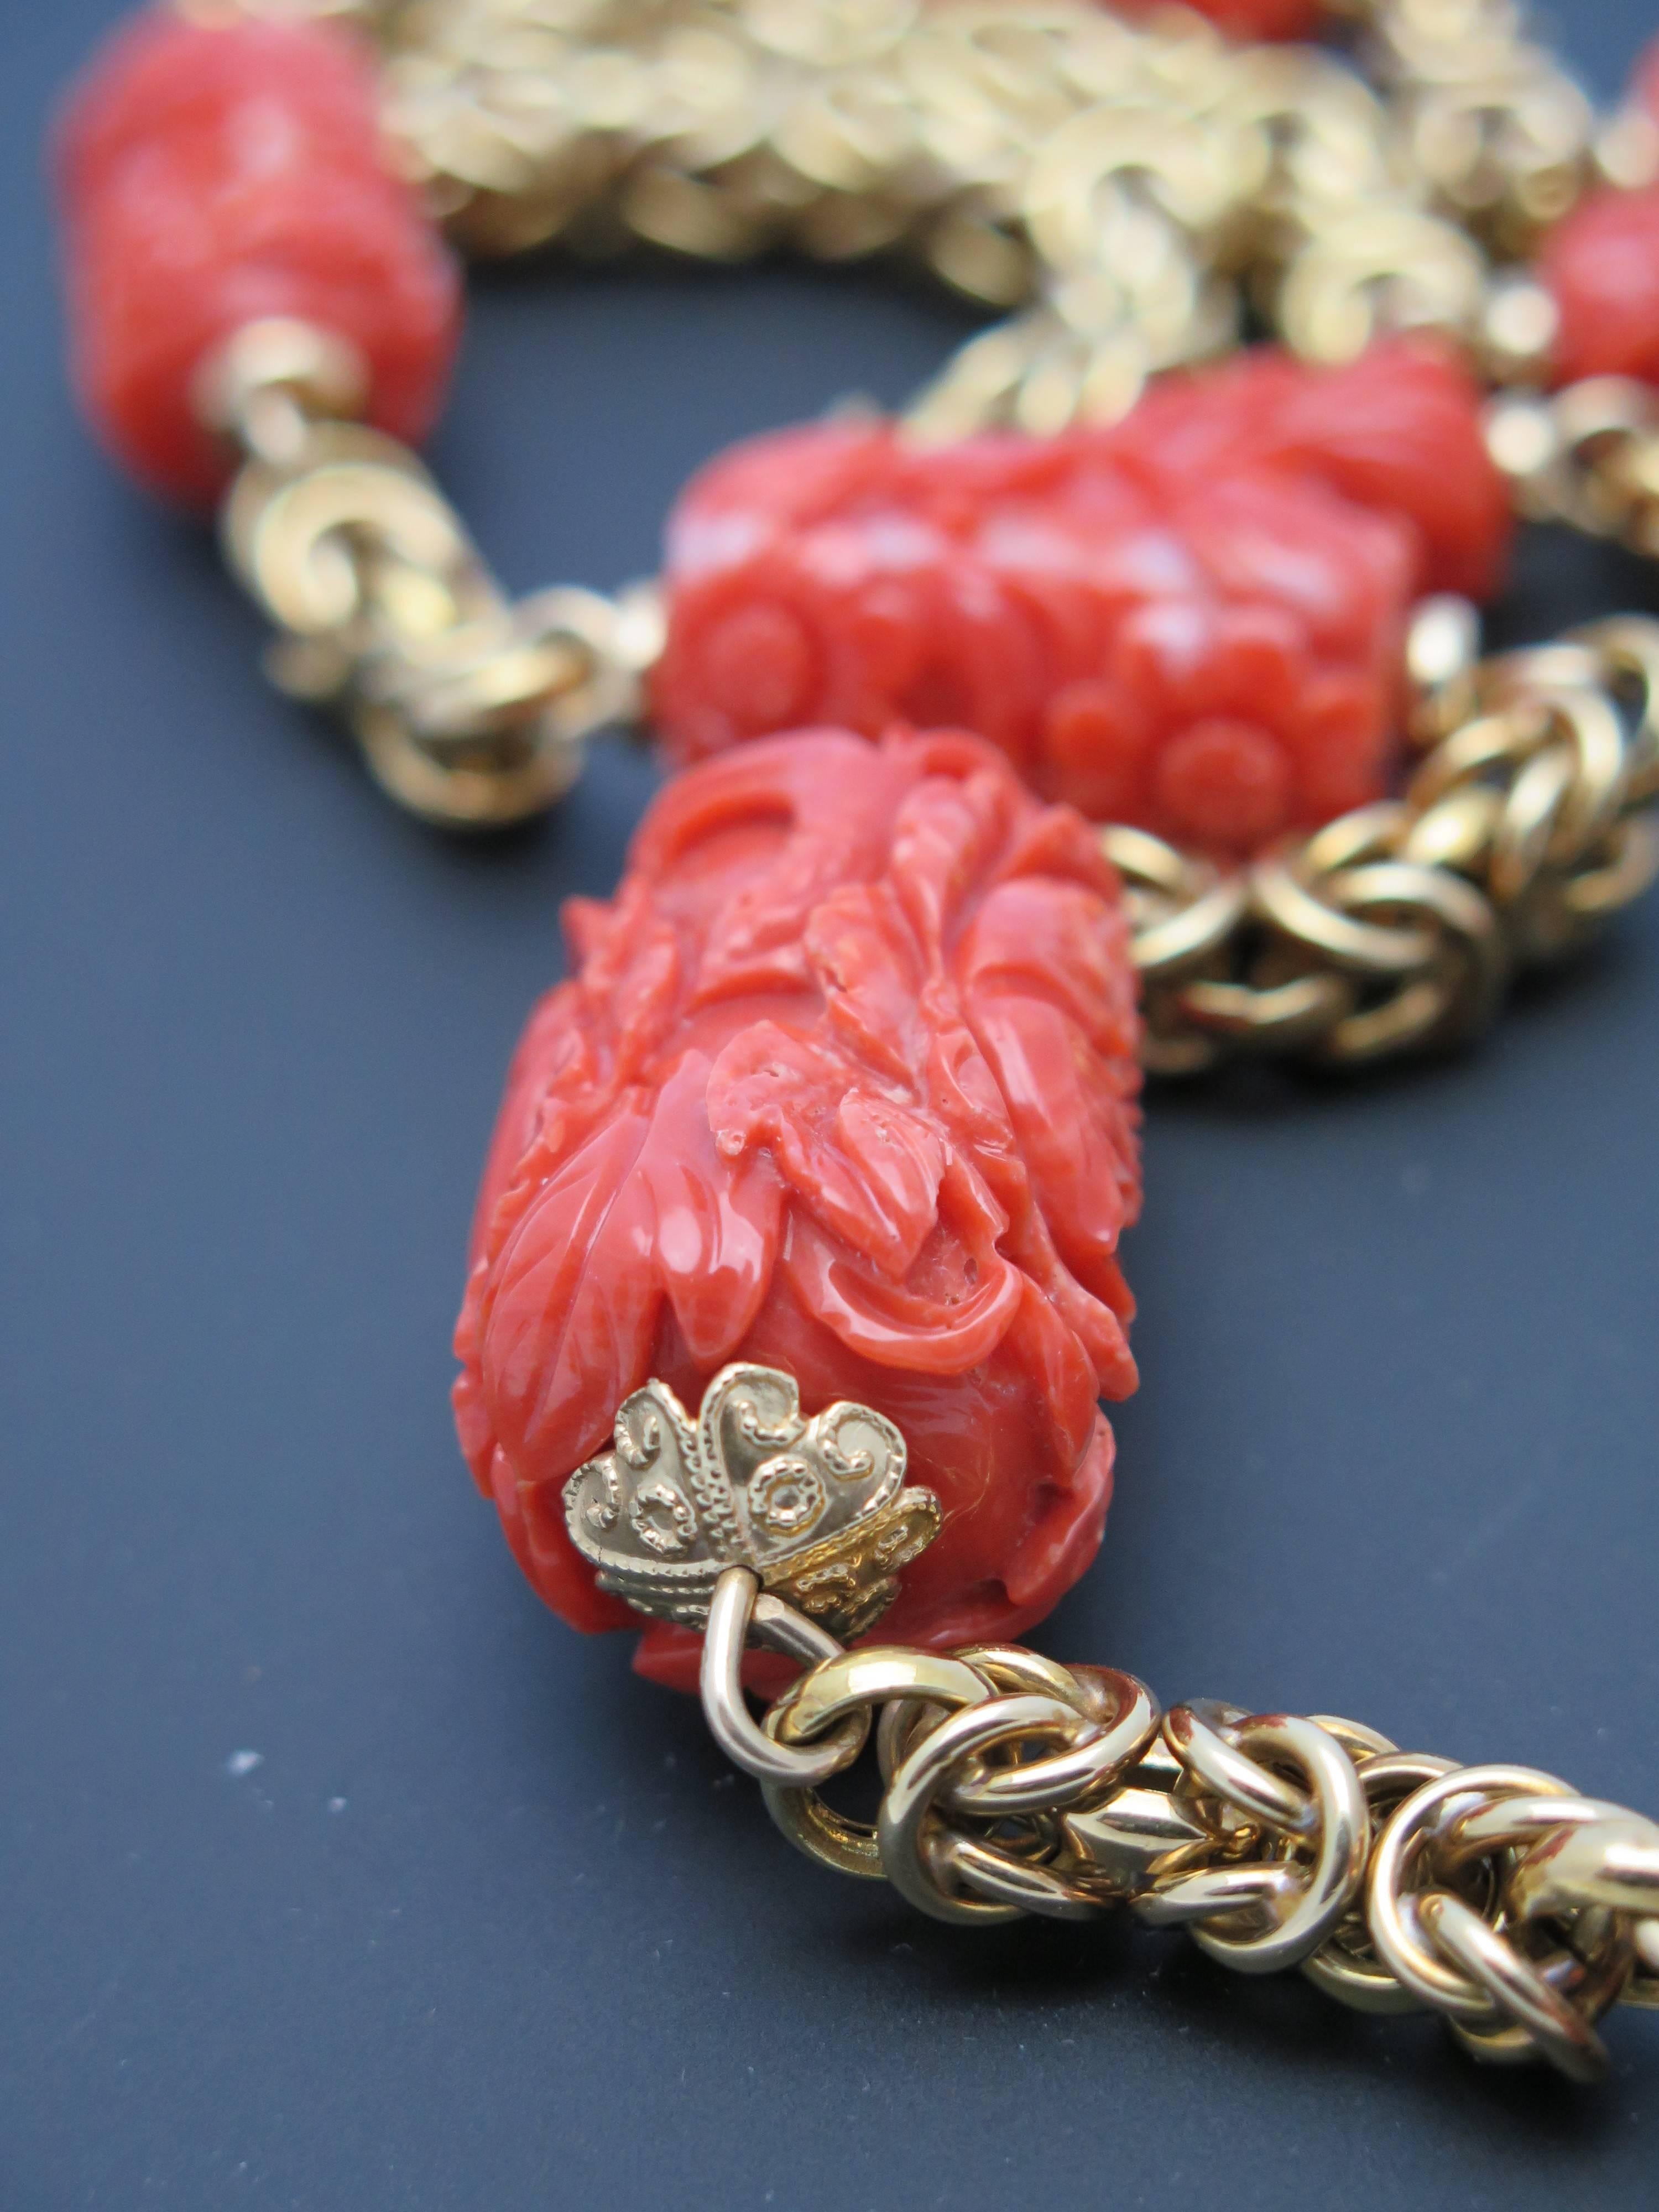 Featuring 11 graduated, oversized cylindrical carved coral beads on a chunky 14k yellow gold Byzantine chain. Each bead is of an overall deep salmon color, and carved with an intricate floral motif. 

The larges bead measures approximately 33mm x